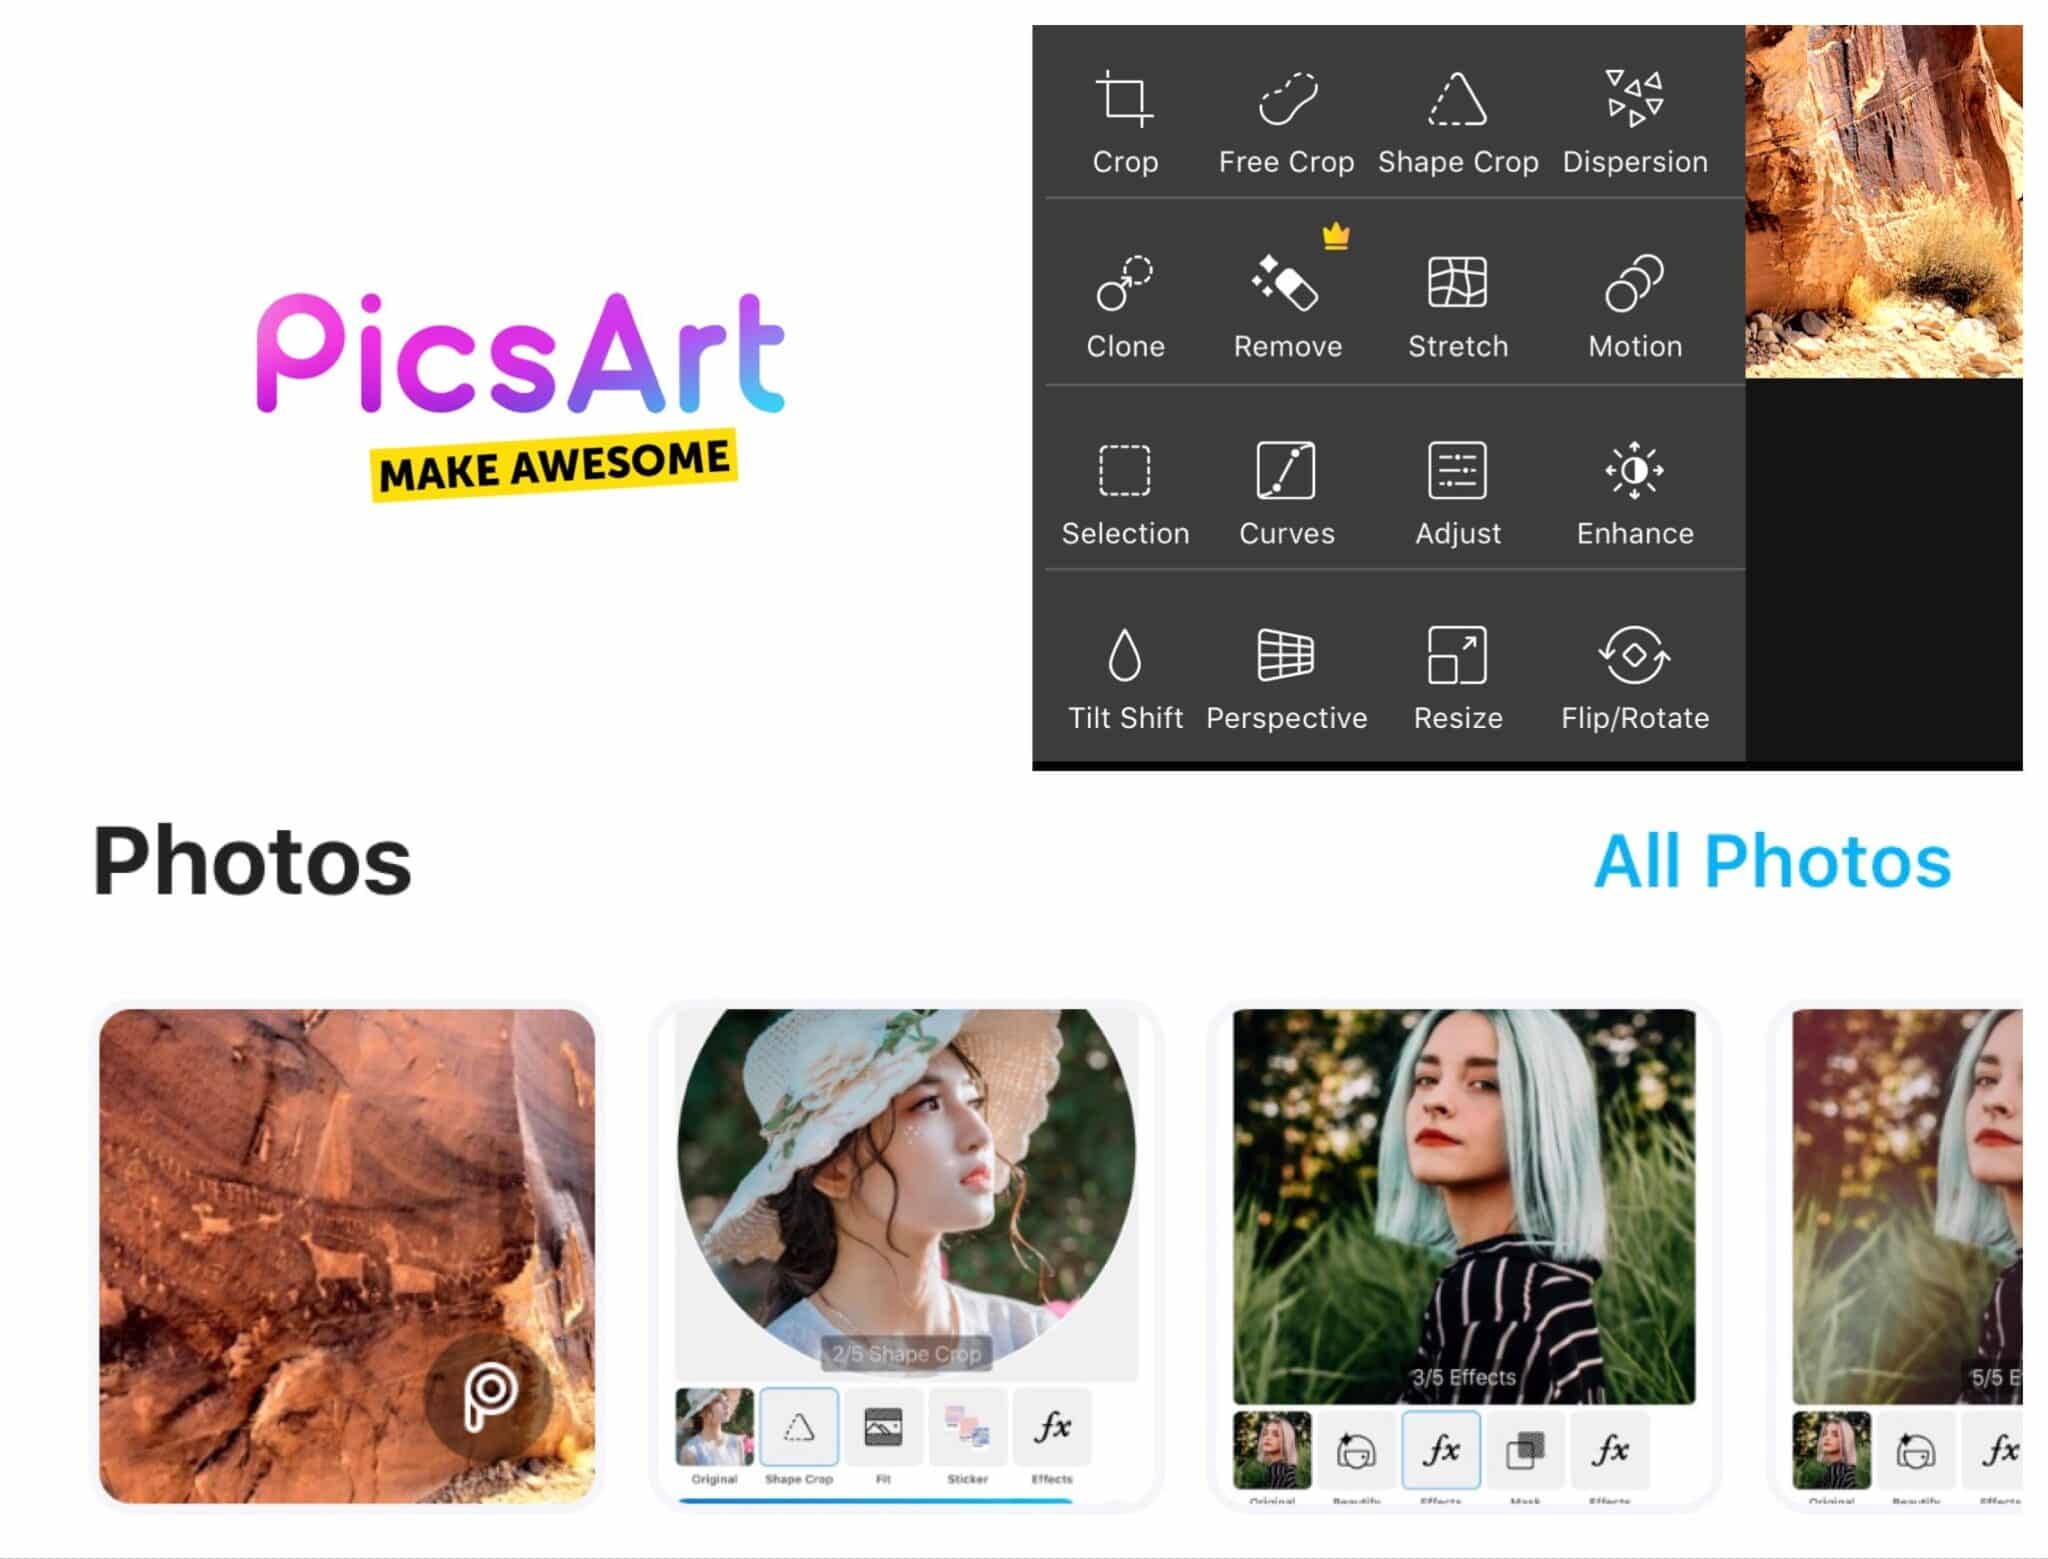 How to Use PicsArt scaled